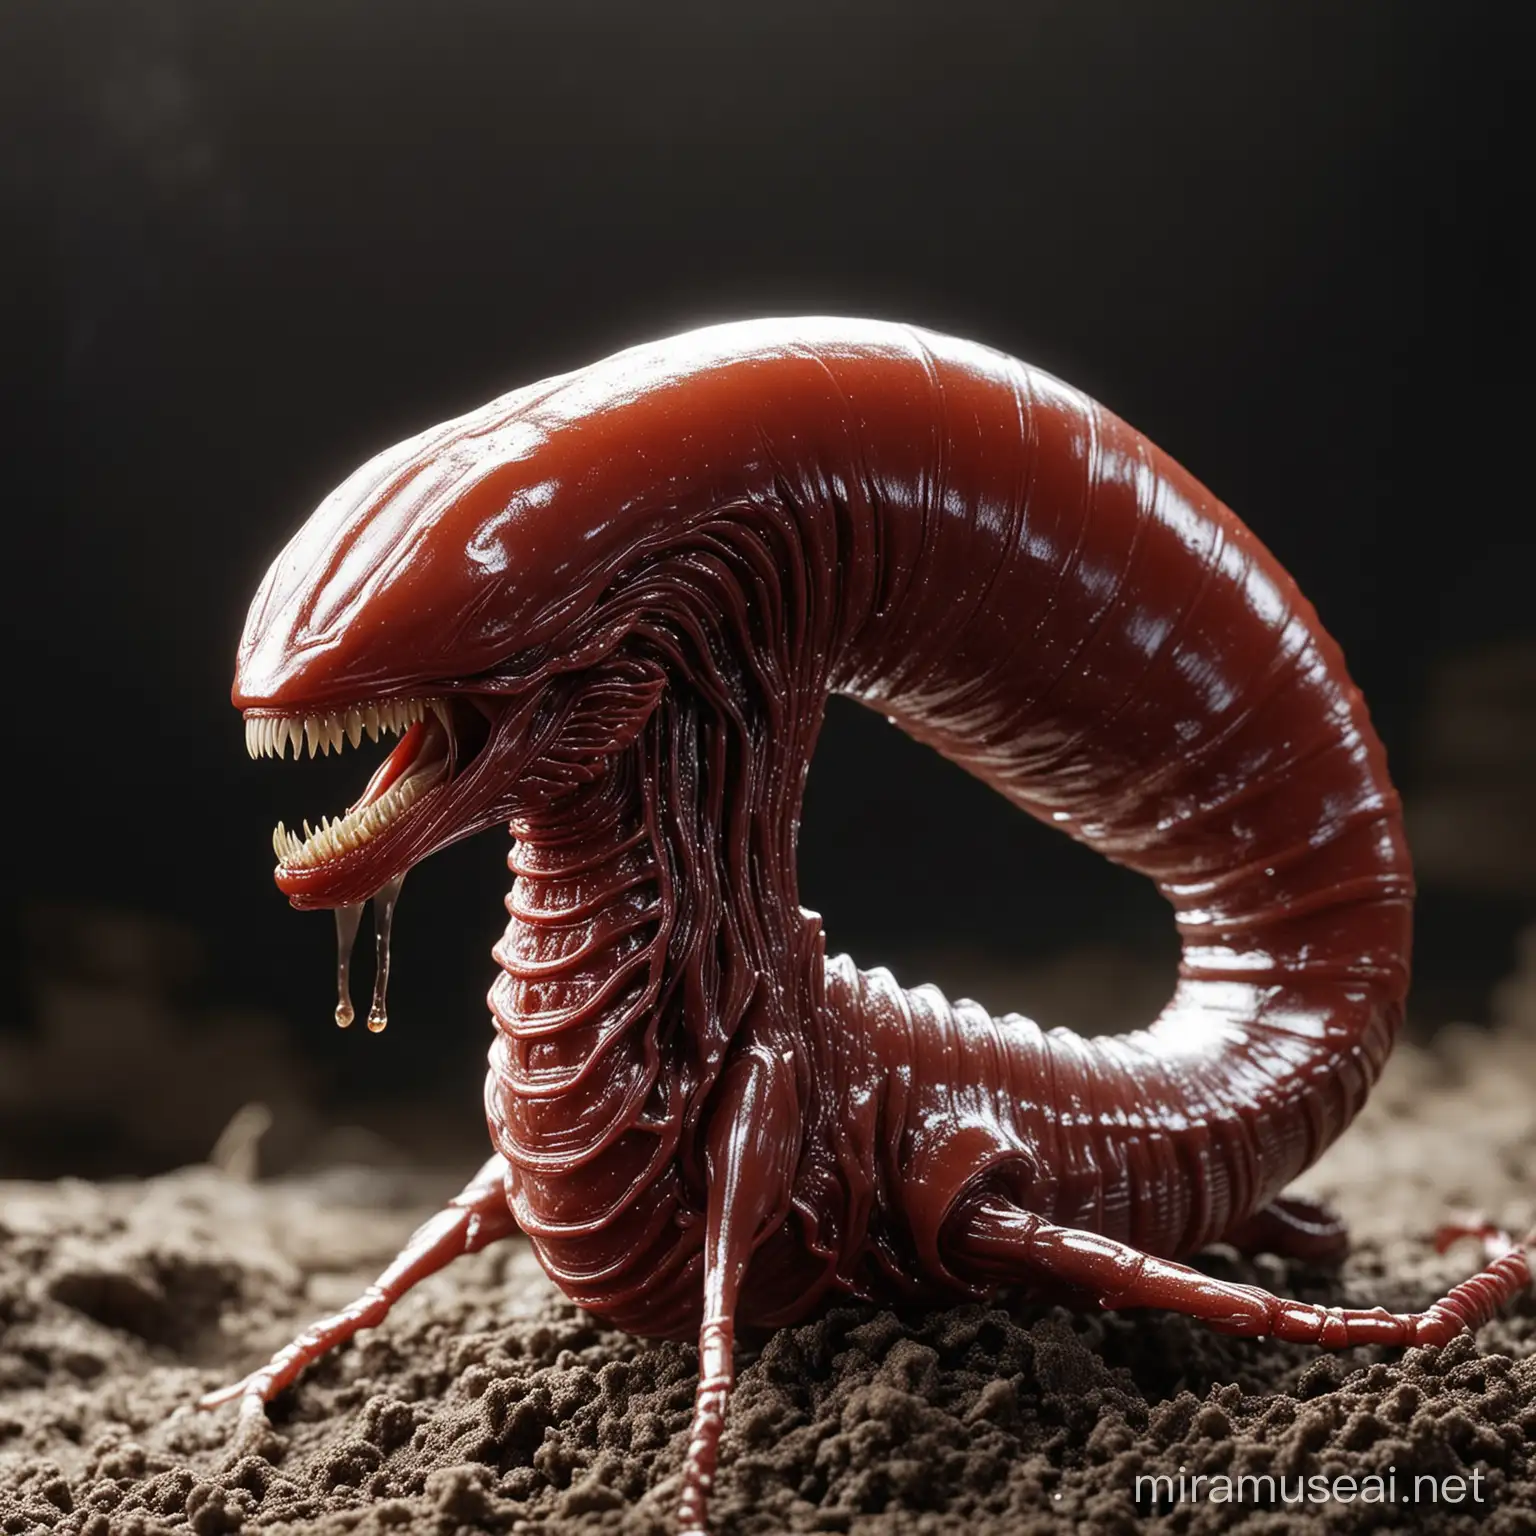 Hybrid slug without shell and xenomorph, very shiny body surface, like red soap. The hybrid slug has the head of a xenomorph, a long neck with protruding veins. Head very shiny, finely patterned in steampunk style, white teeth, flowing saliva, ukiyo-e, photo, cinematic